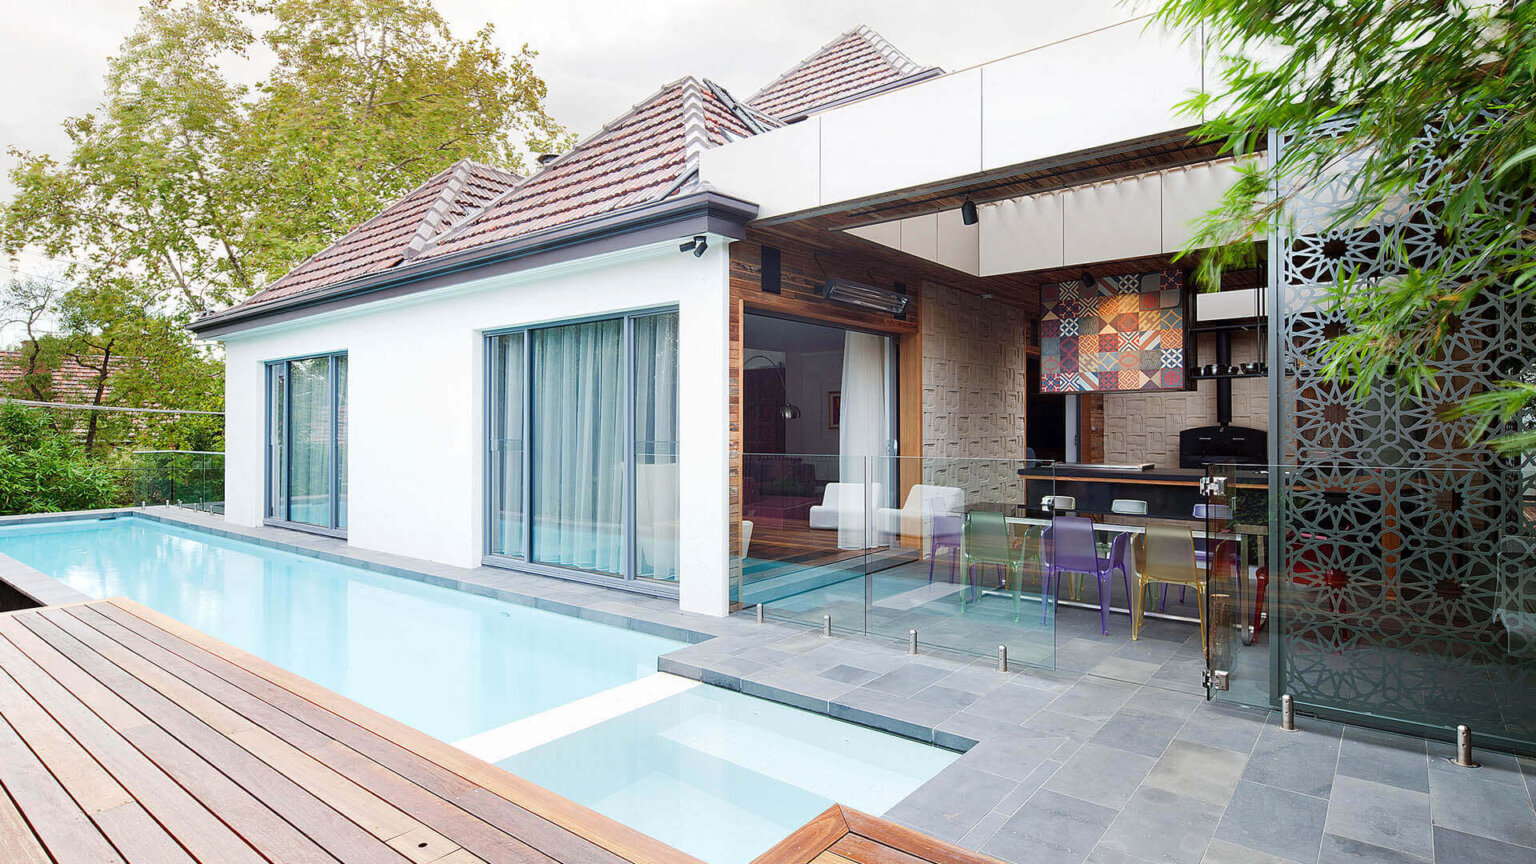 Malvern extensions and renovation - daytime view of the pool